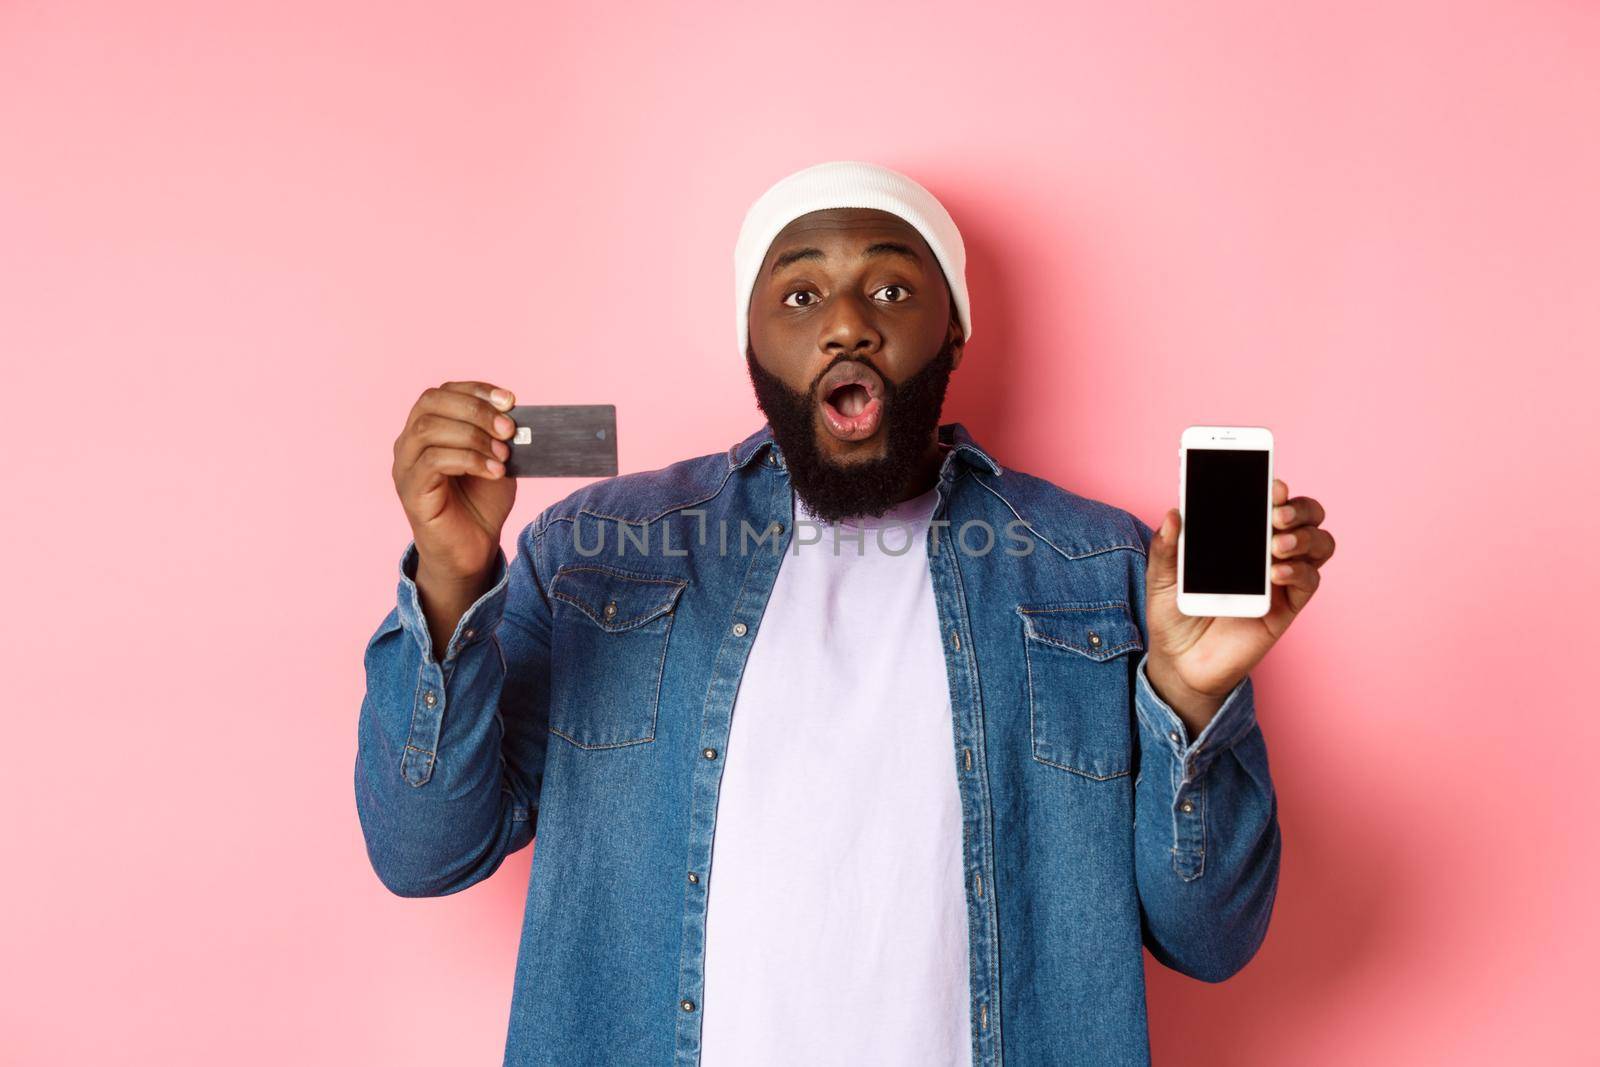 Online shopping. Excited Black man showing credit card and mobile phone screen, standing over pink background amazed.